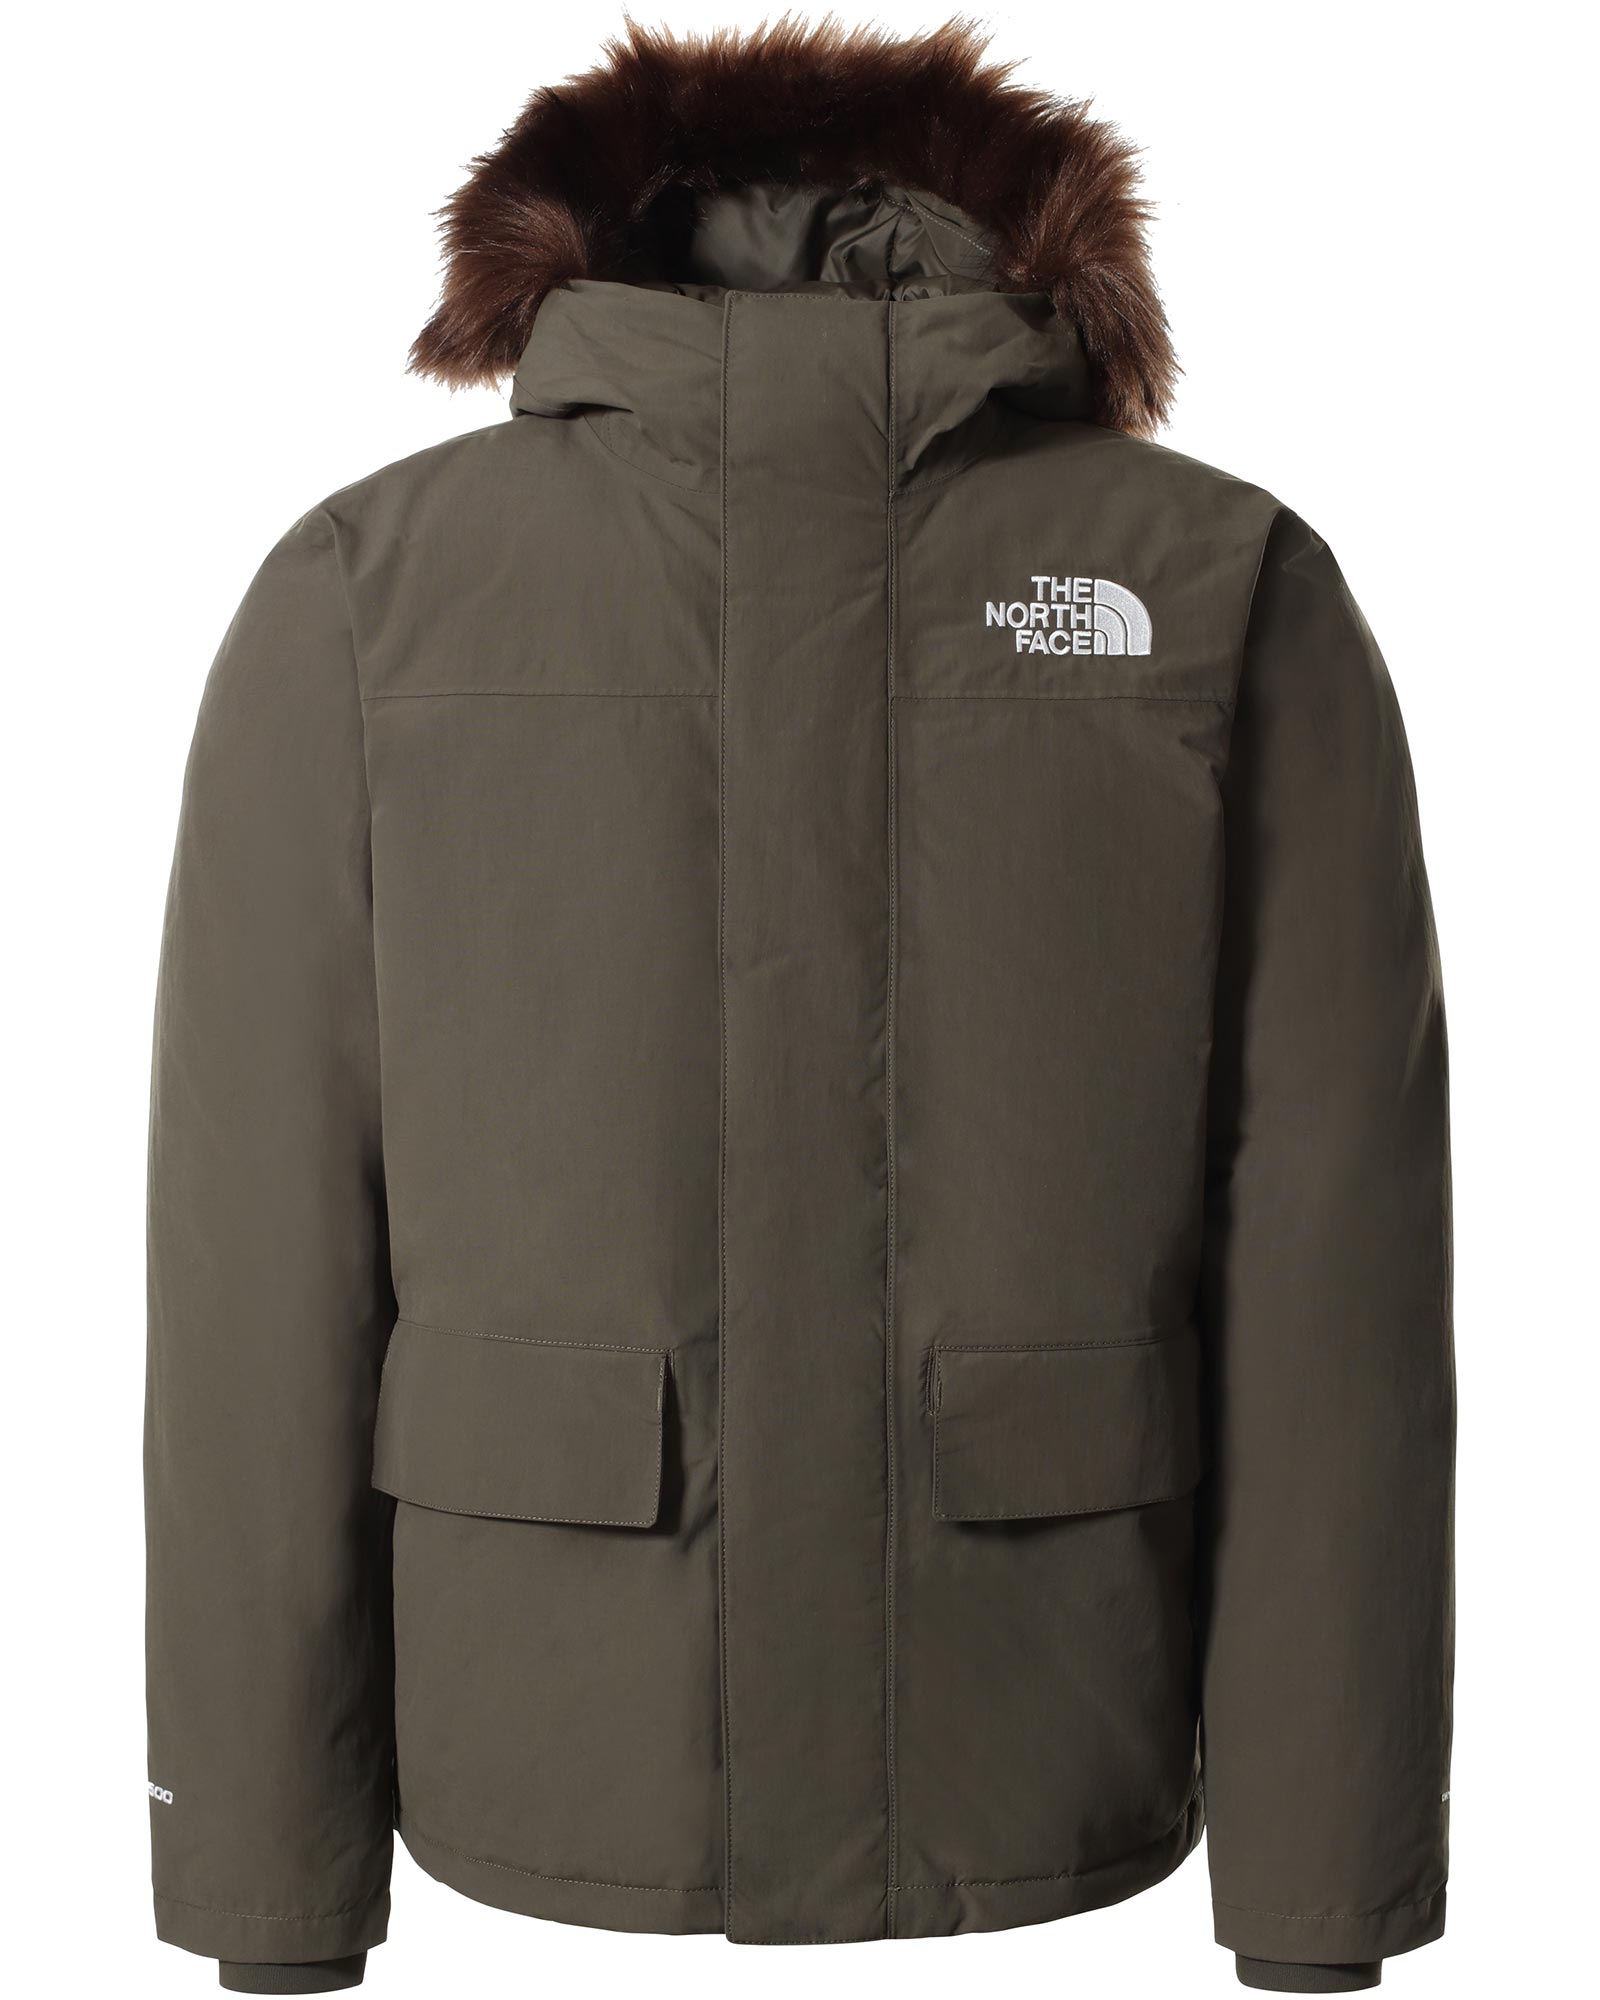 The North Face Arctic Men’s Parka Jacket - New Taupe Green XXL